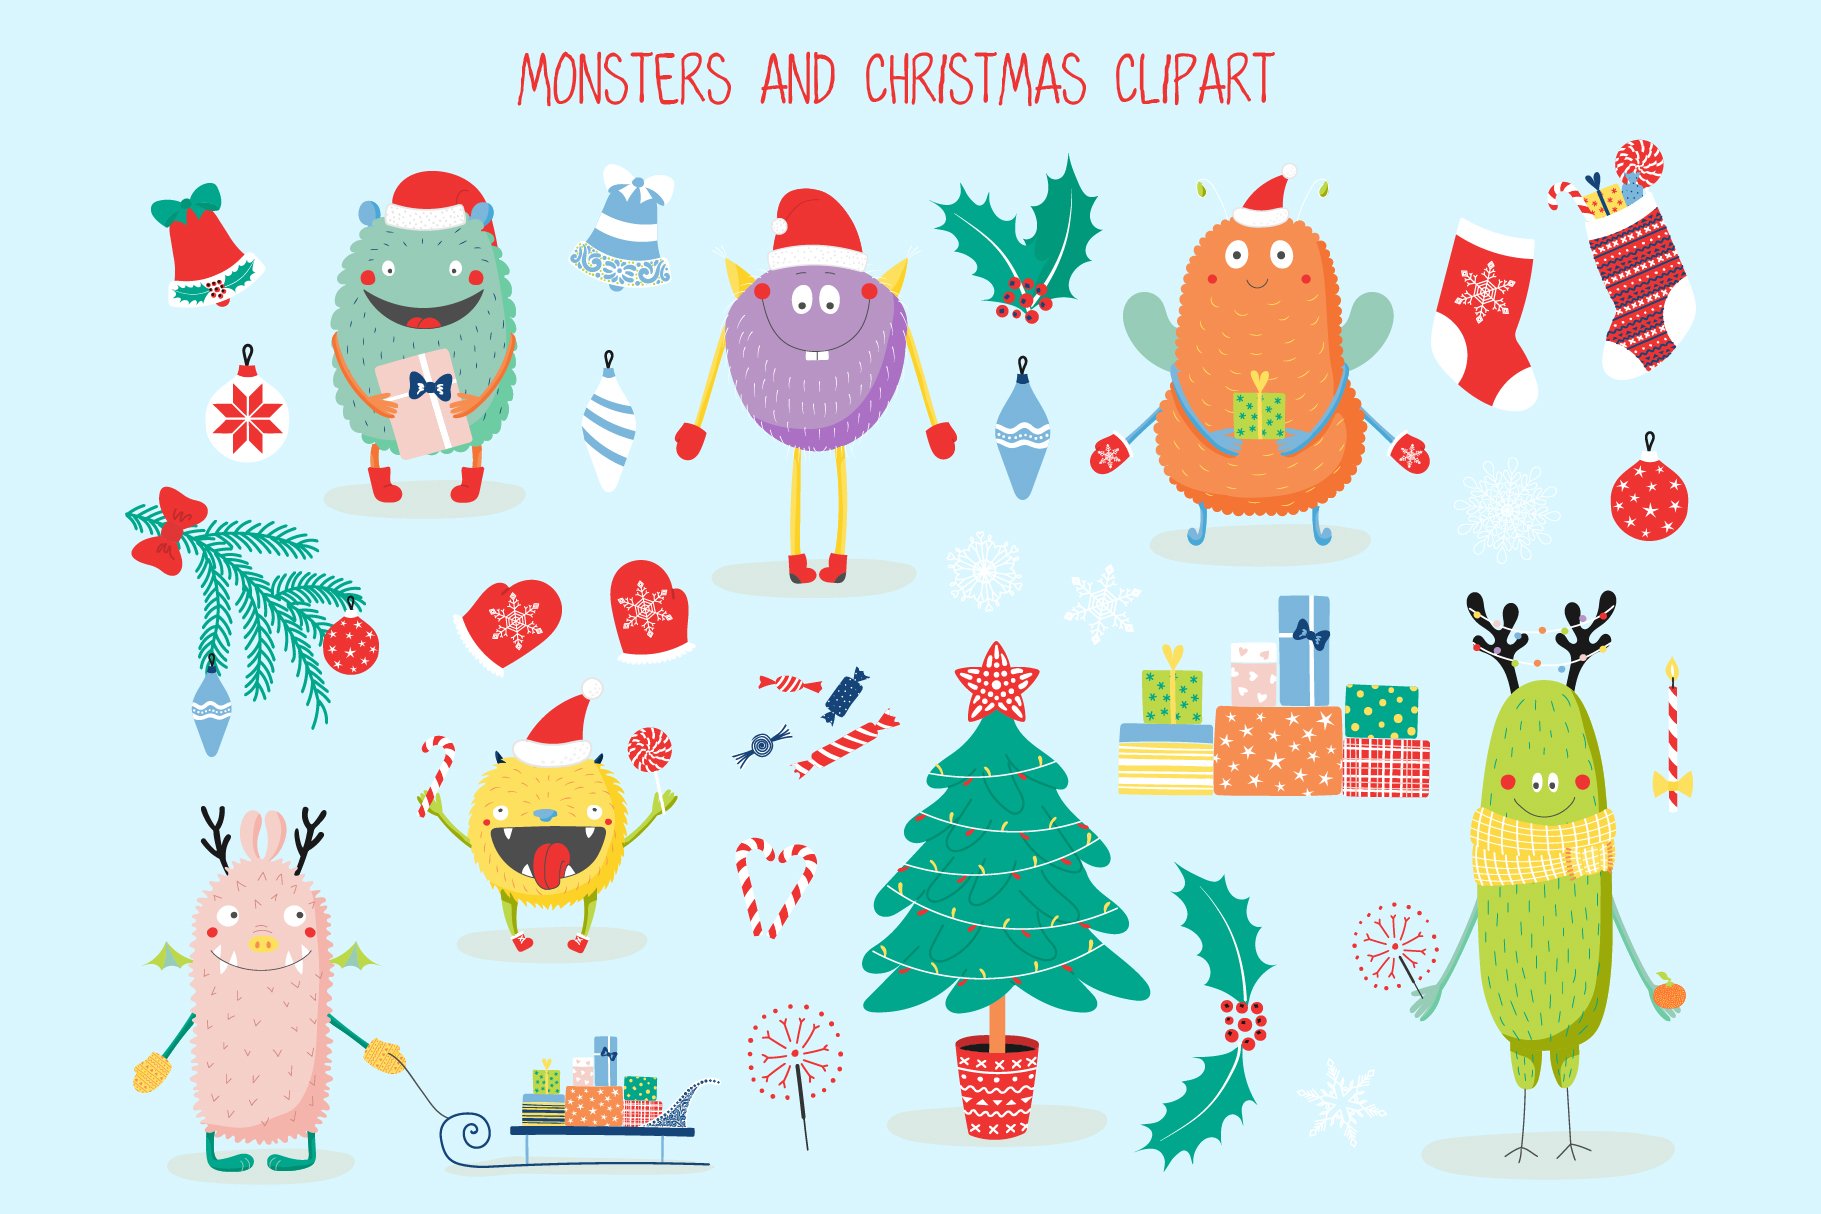 Light blue background with various Christmas elements for cool monster illustration.